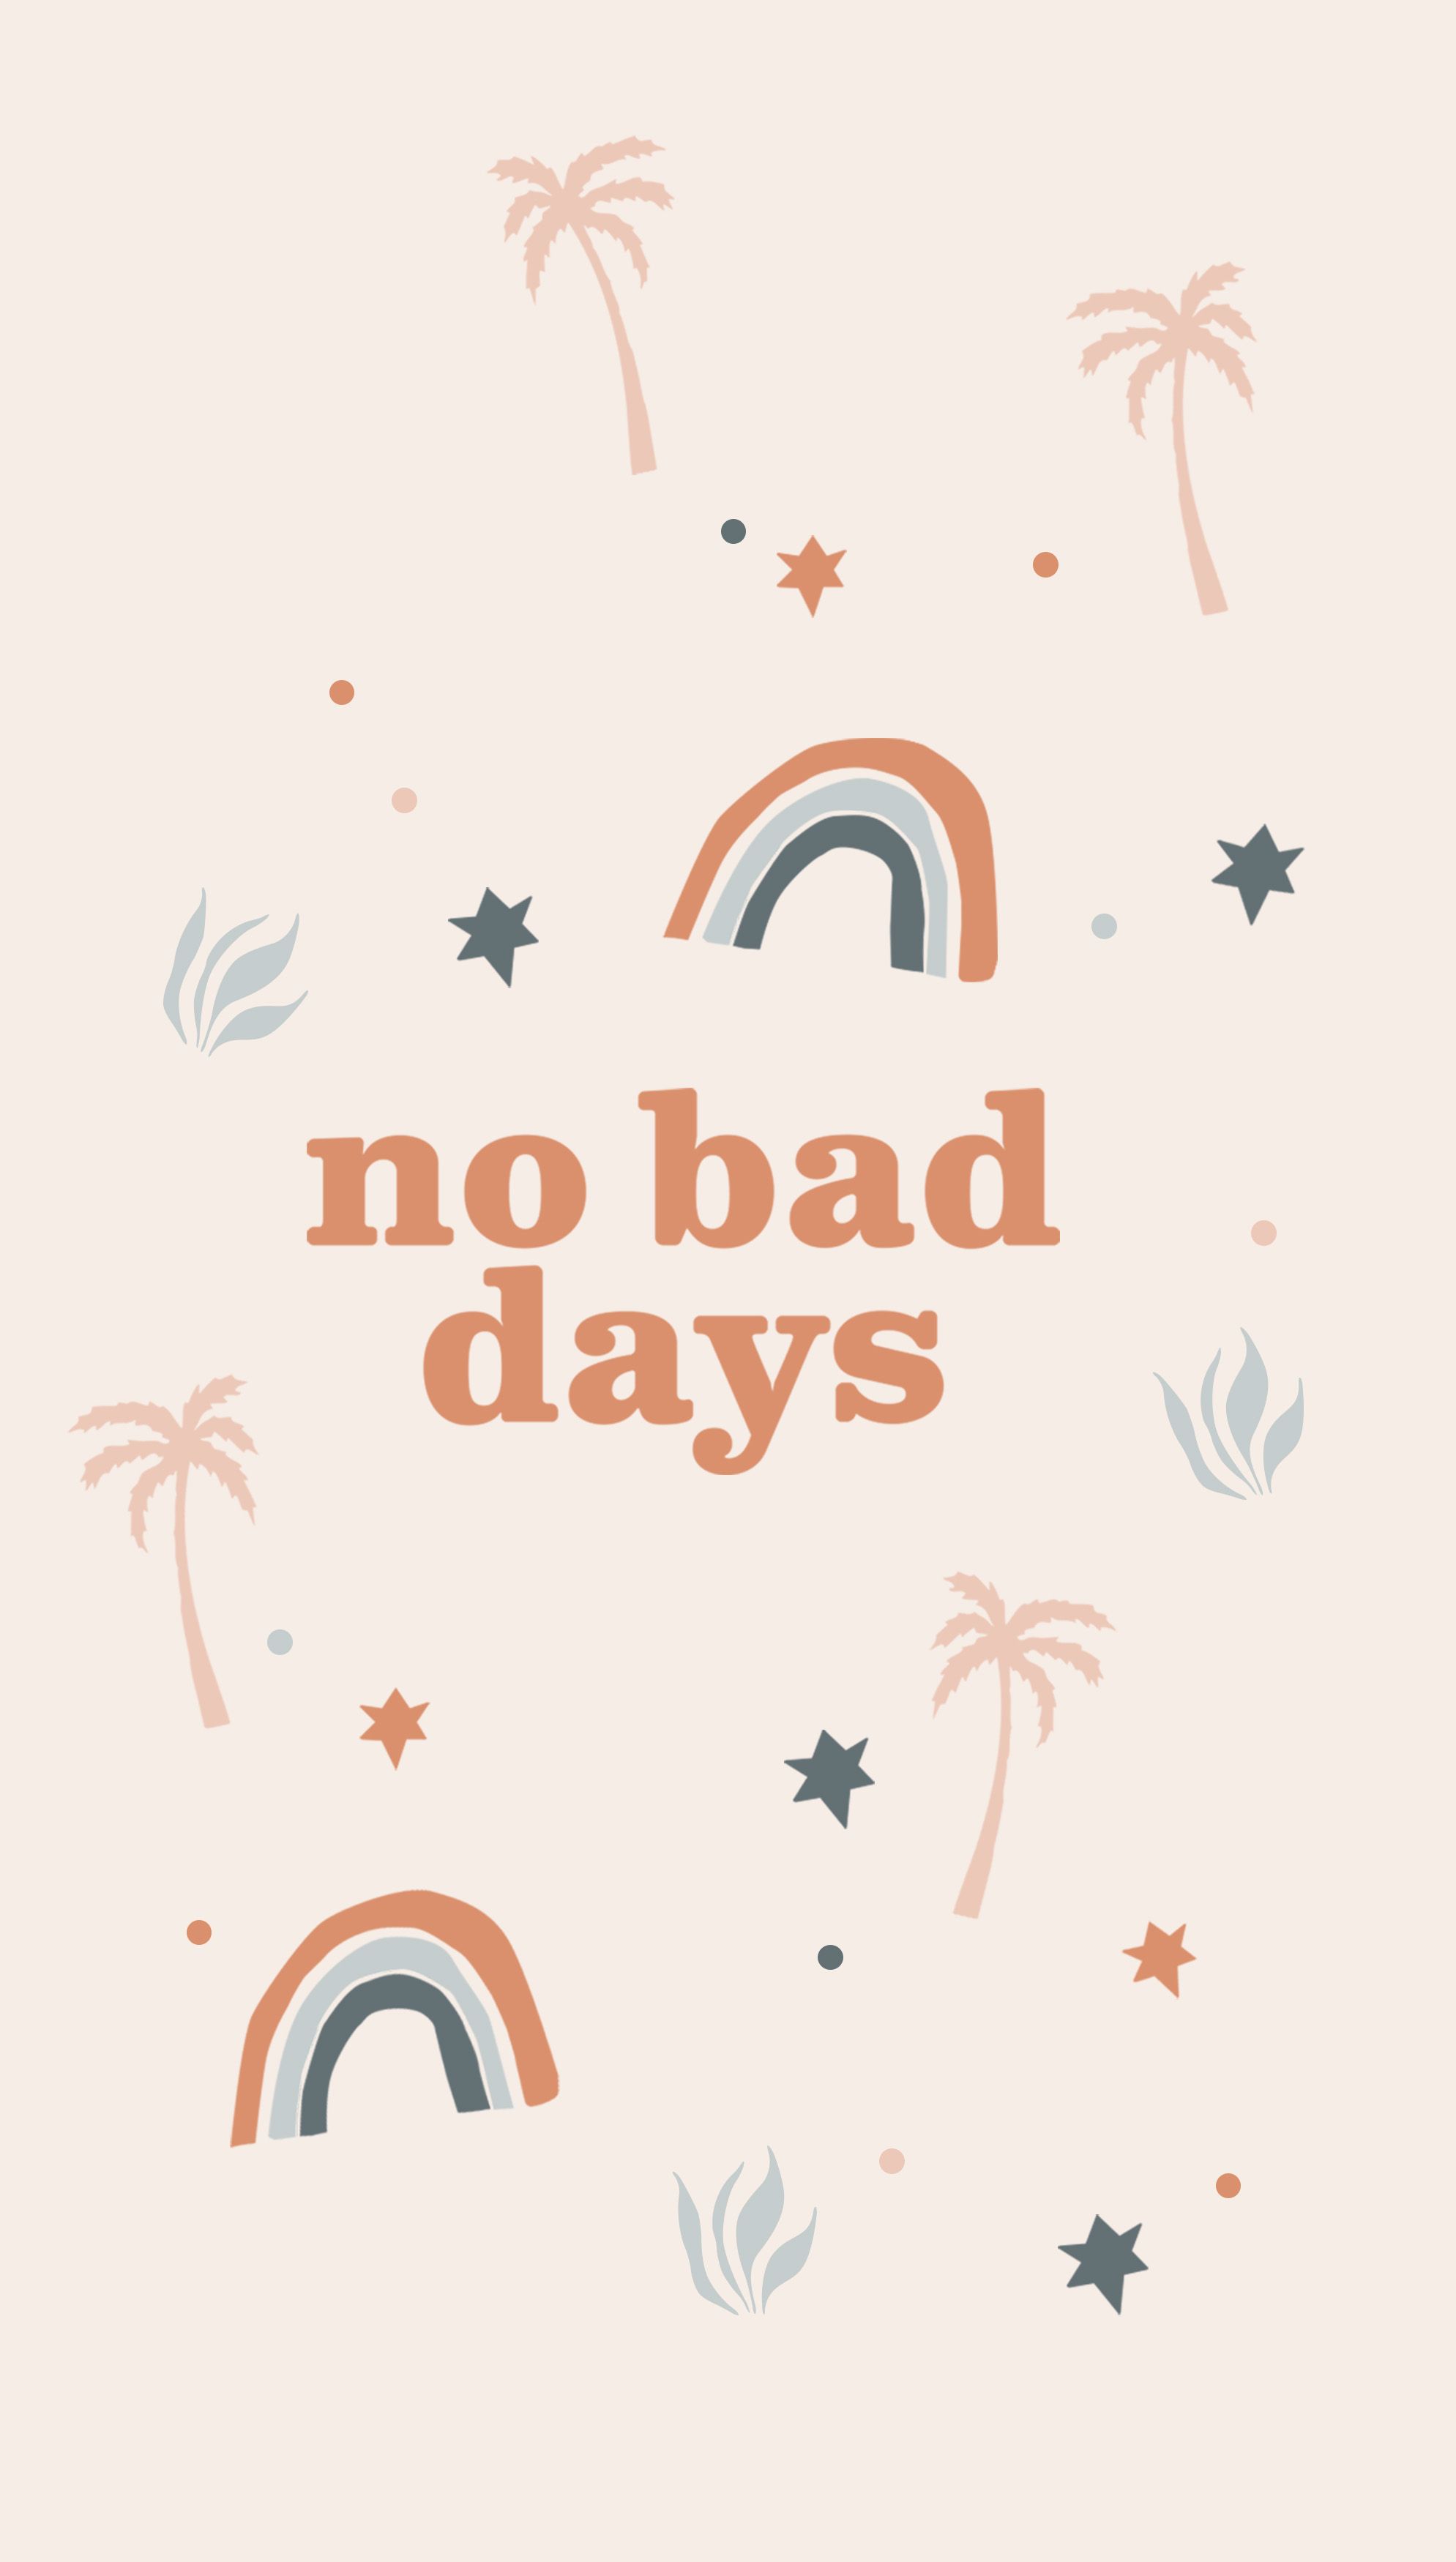 Bad Day L.A. wallpaper (2 images) pictures download